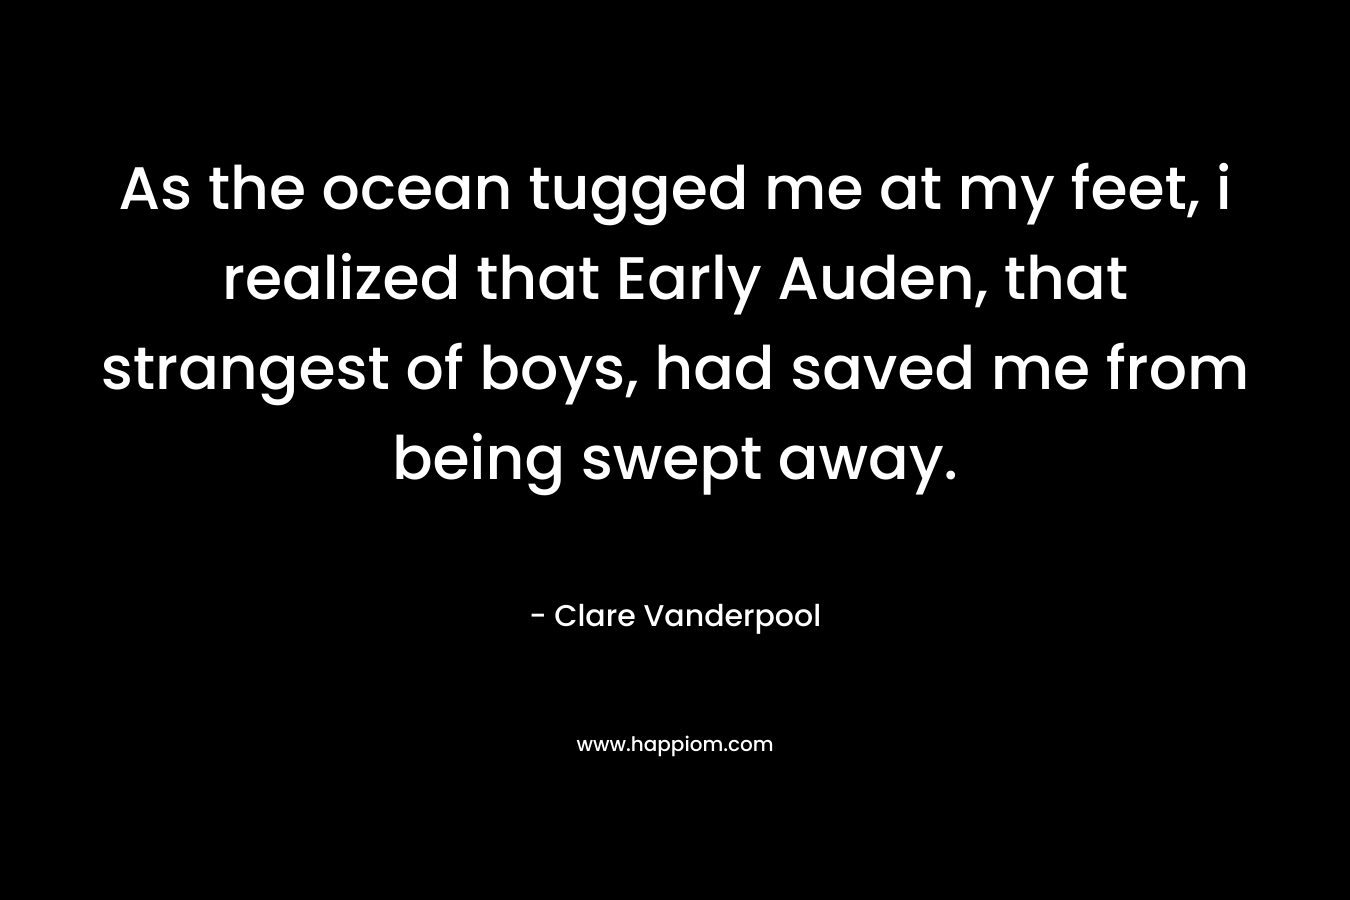 As the ocean tugged me at my feet, i realized that Early Auden, that strangest of boys, had saved me from being swept away. – Clare Vanderpool